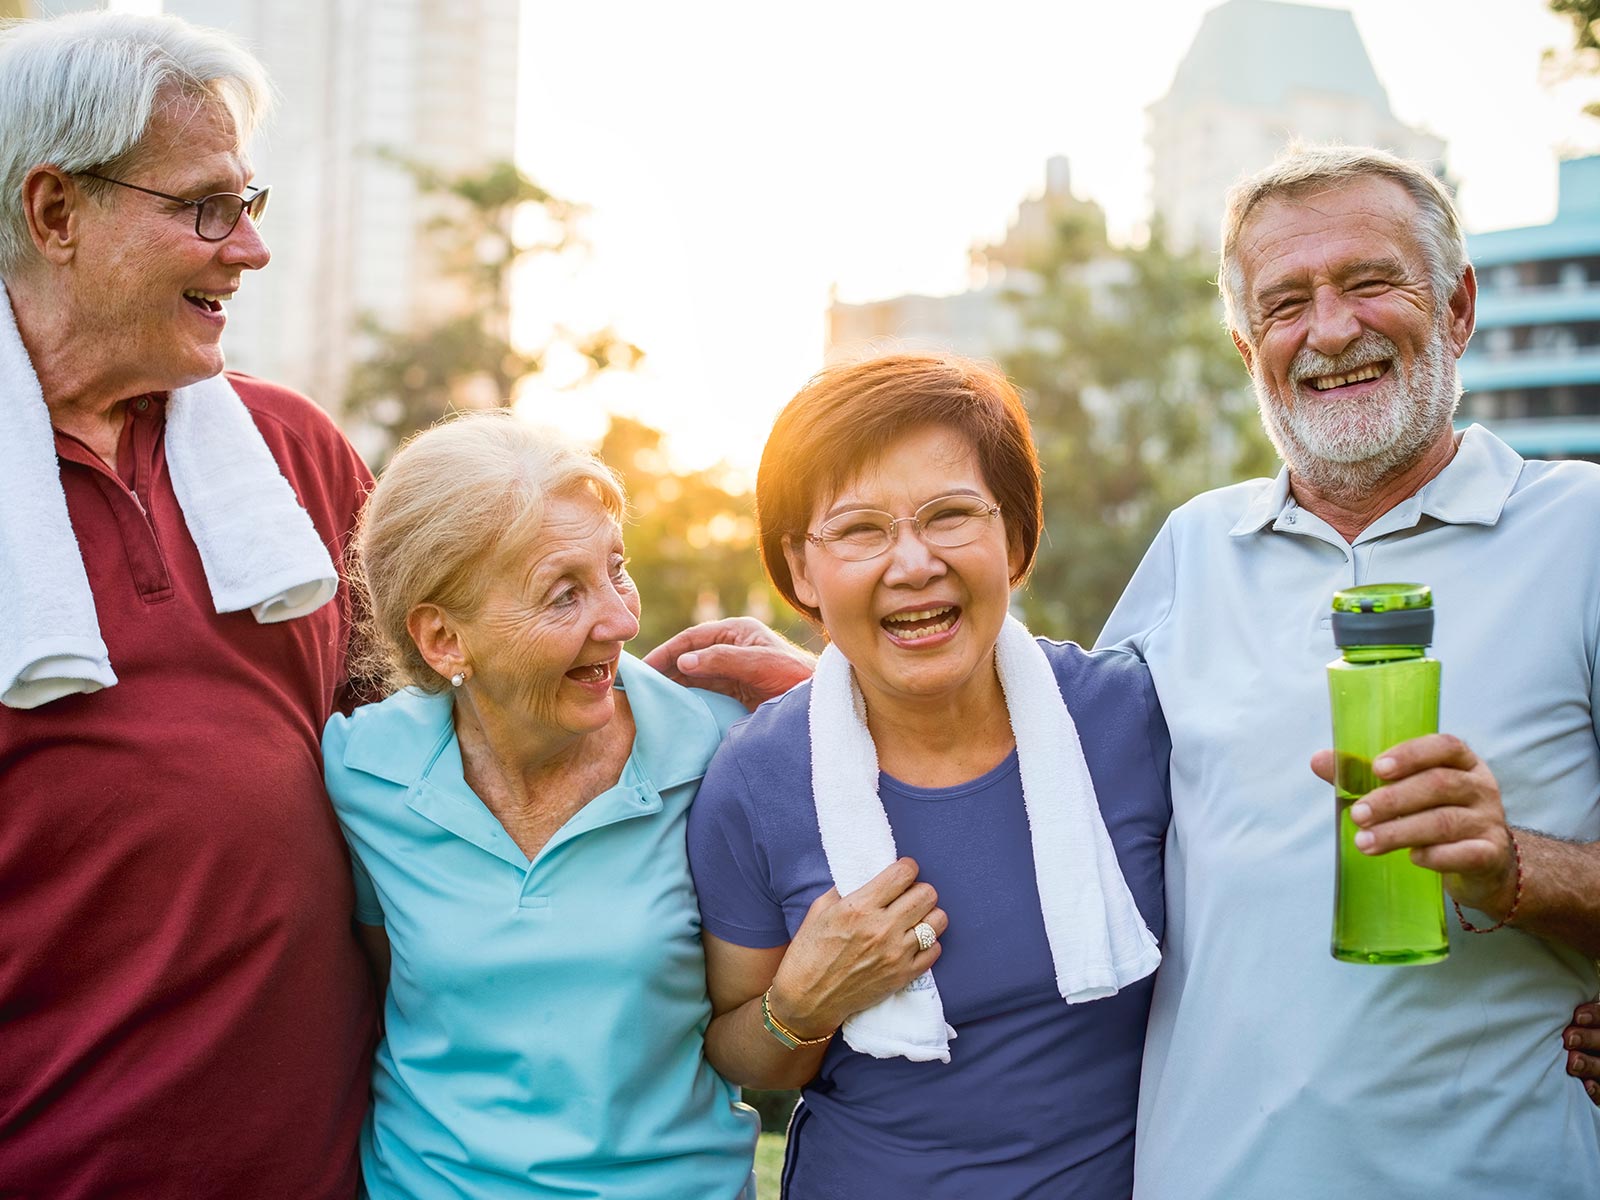 Group of older people laughing and smiling.